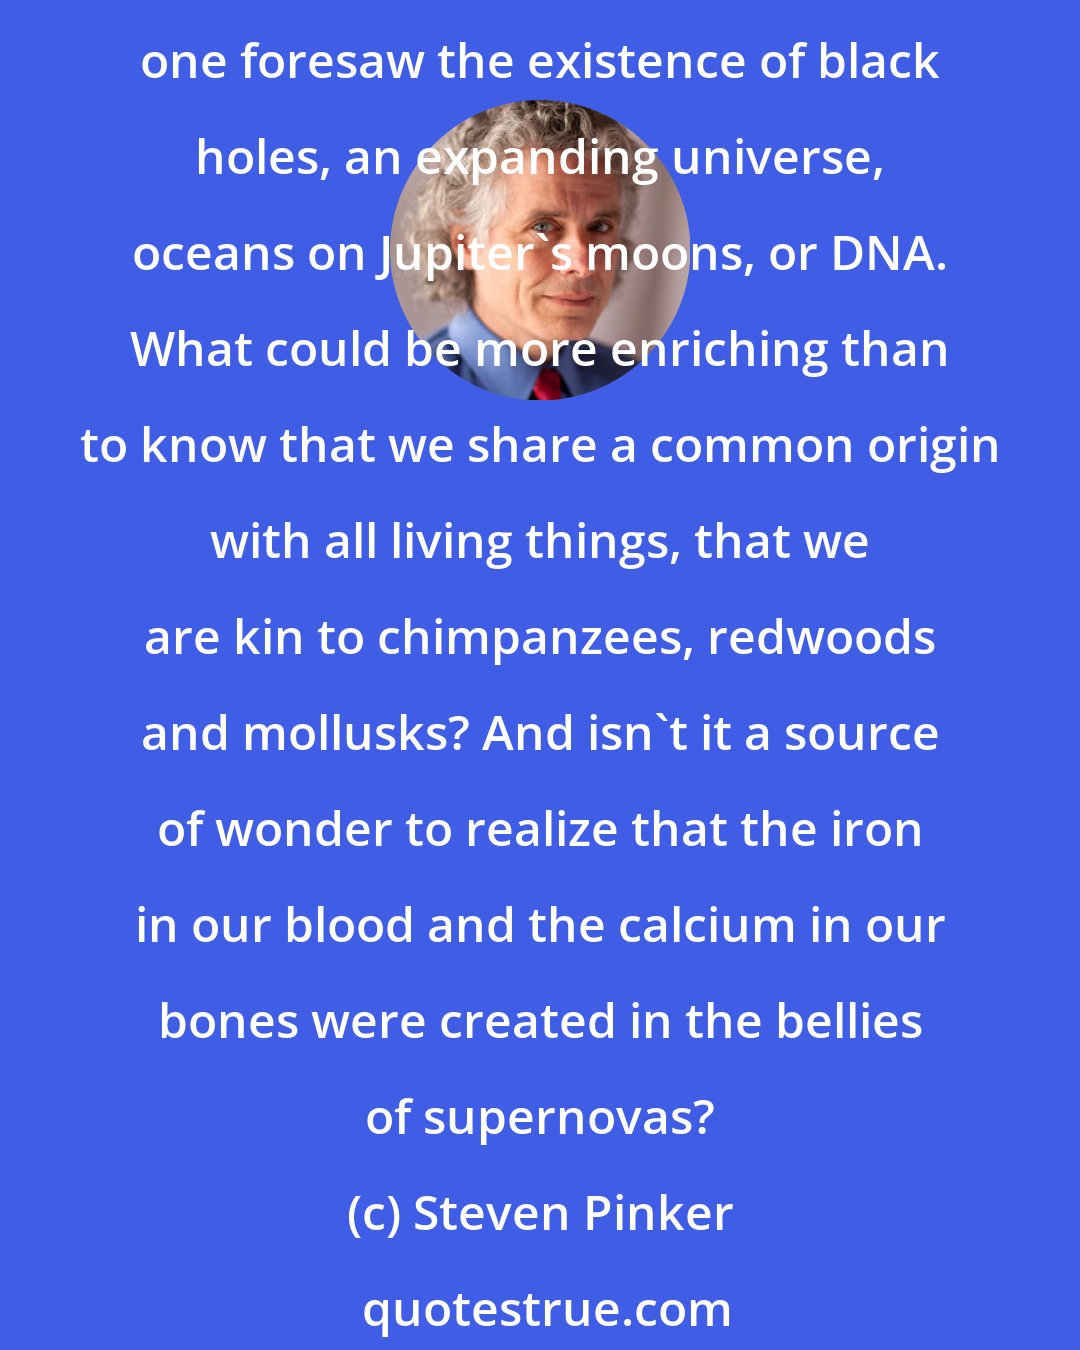 Steven Pinker: What a dull universe it would be if everything in it conformed to our expectations, if it held nothing to surprise or baffle us or confound our common sense. A century ago no one foresaw the existence of black holes, an expanding universe, oceans on Jupiter's moons, or DNA. What could be more enriching than to know that we share a common origin with all living things, that we are kin to chimpanzees, redwoods and mollusks? And isn't it a source of wonder to realize that the iron in our blood and the calcium in our bones were created in the bellies of supernovas?